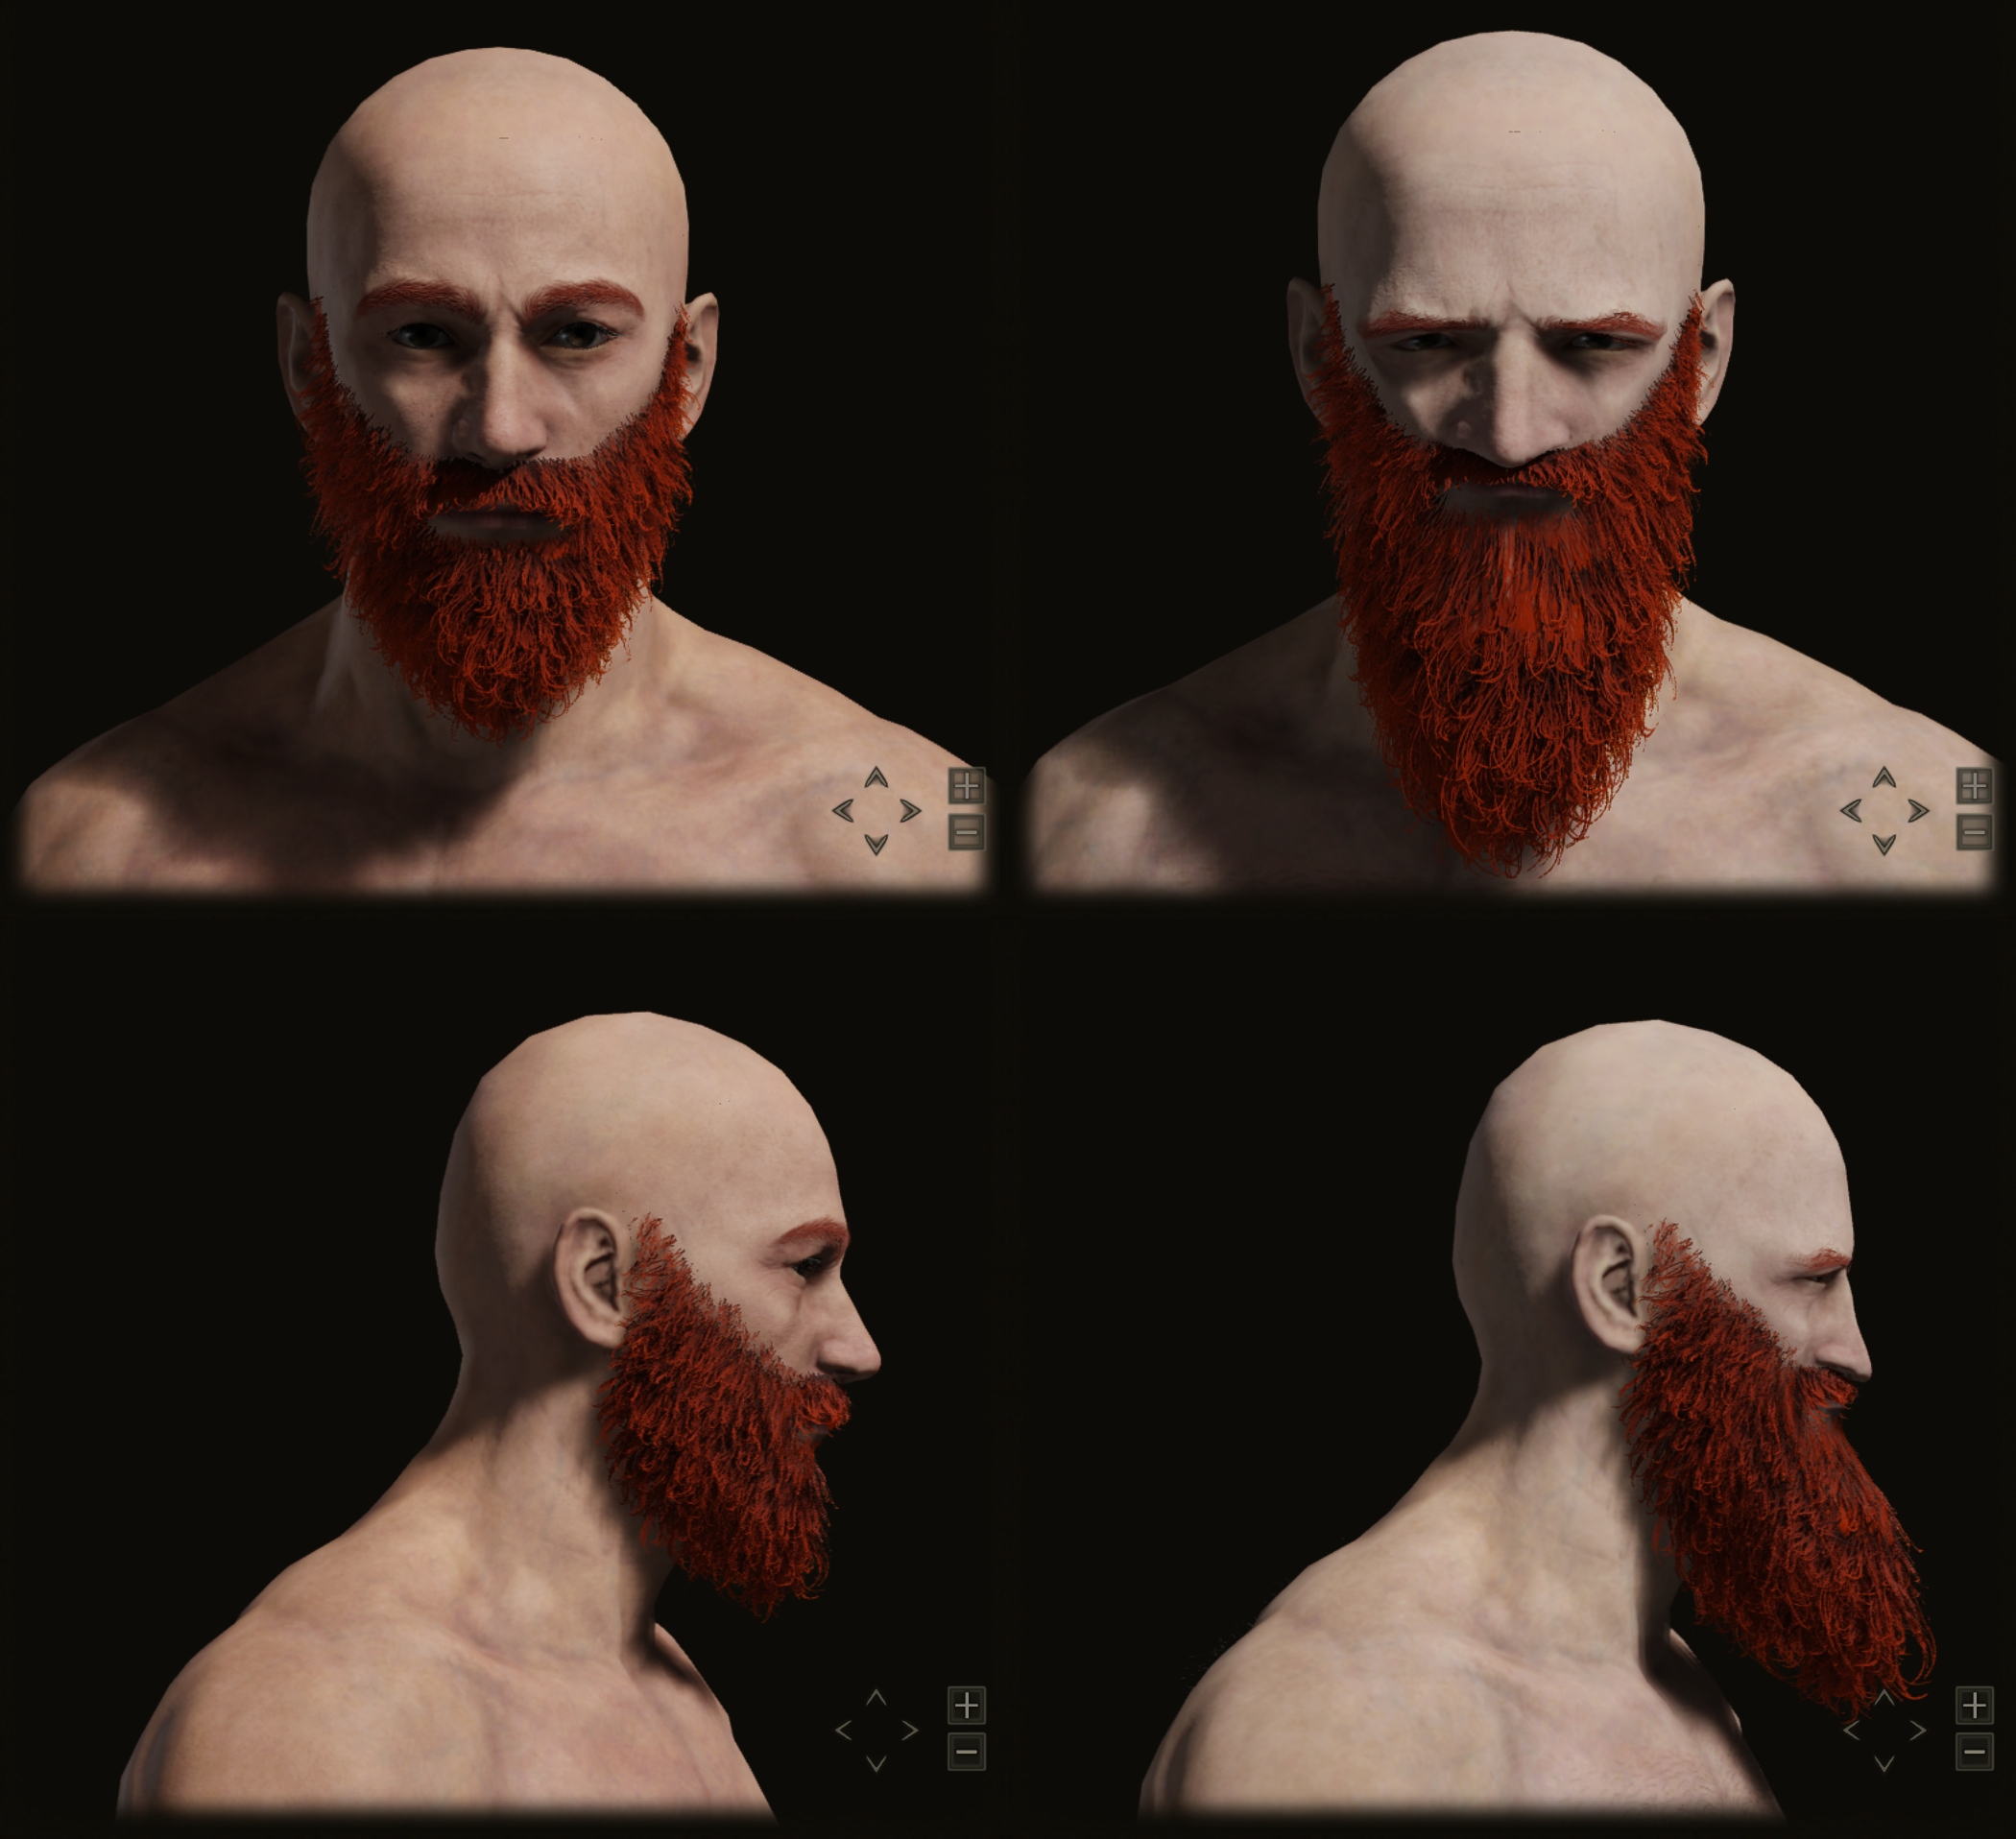 ELDEN RING - How to Get Bigger Beard in Game Guide - What results can we expect? - C8D846E